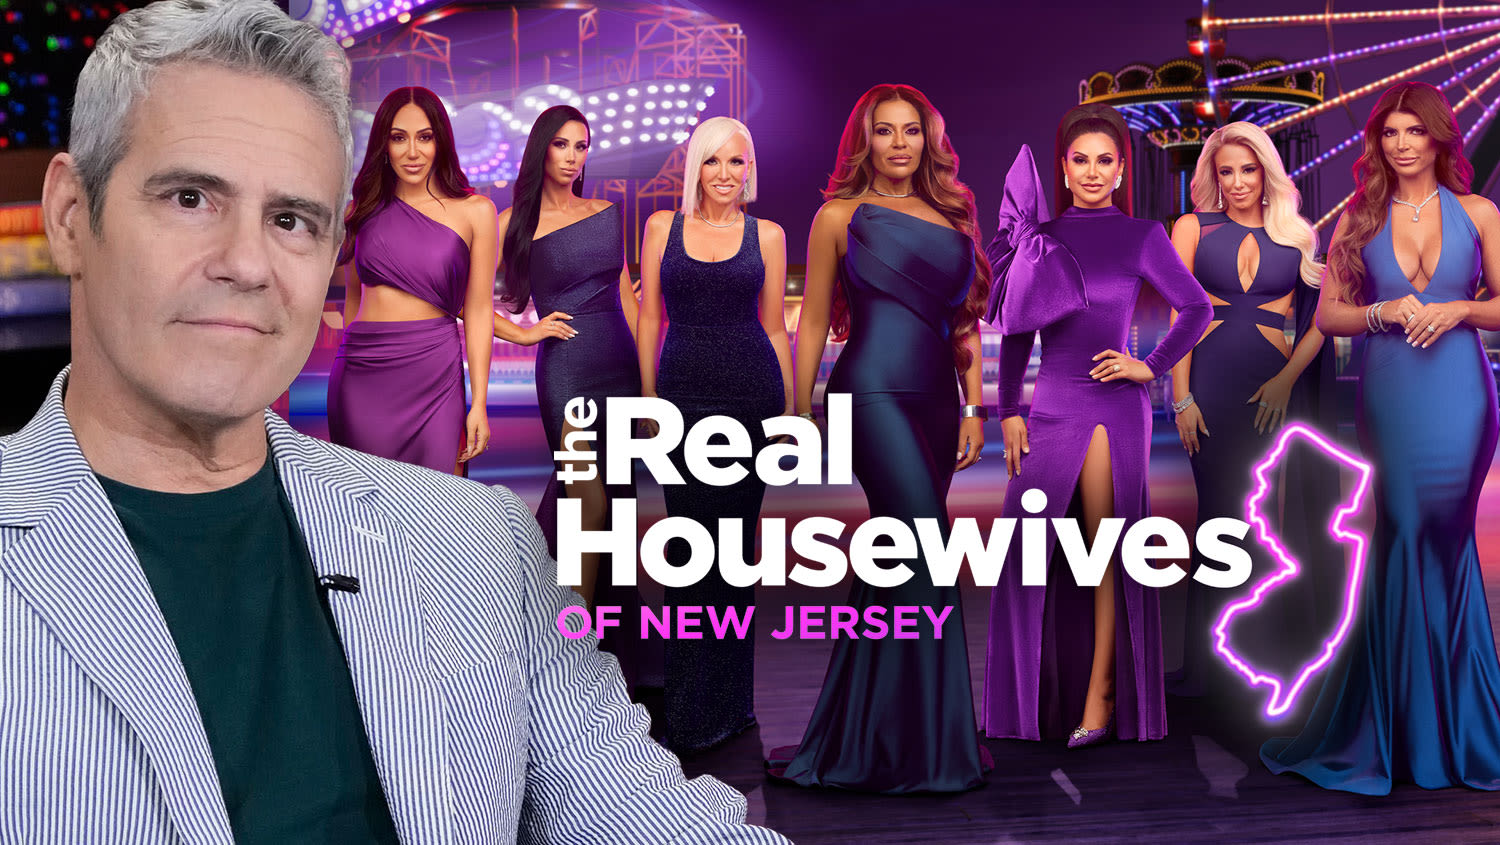 Andy Cohen Hints At ‘RHONJ’ Season 15 Cast Shakeup After Scrapping Traditional Season 14 Reunion